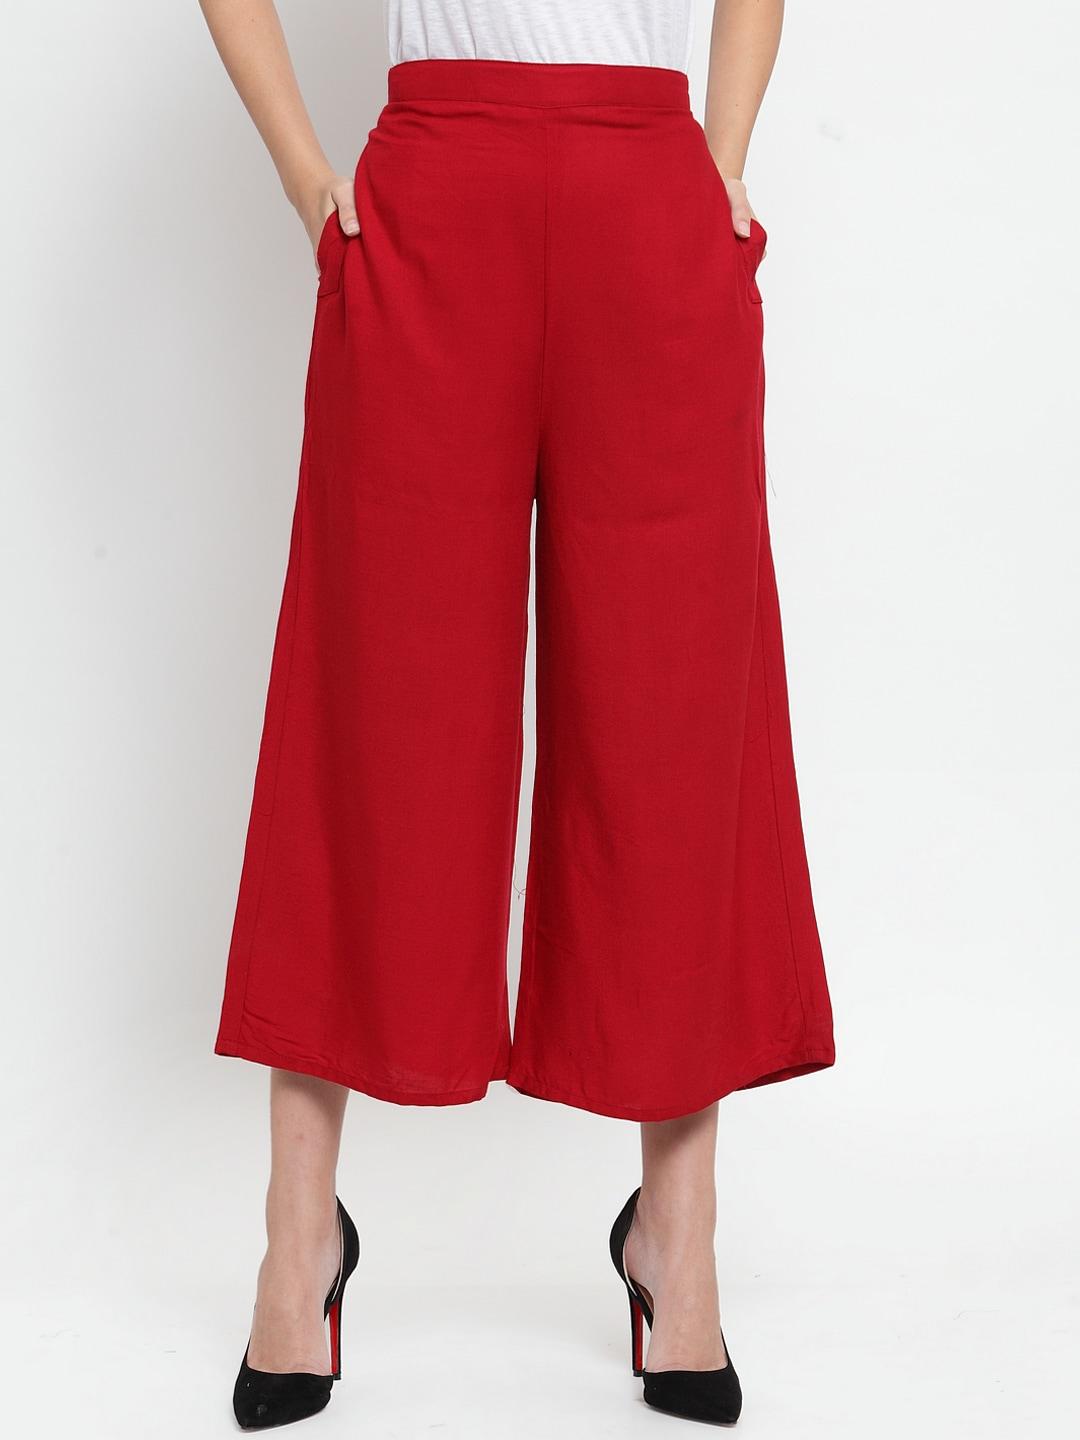 clora creation women maroon flared solid culottes